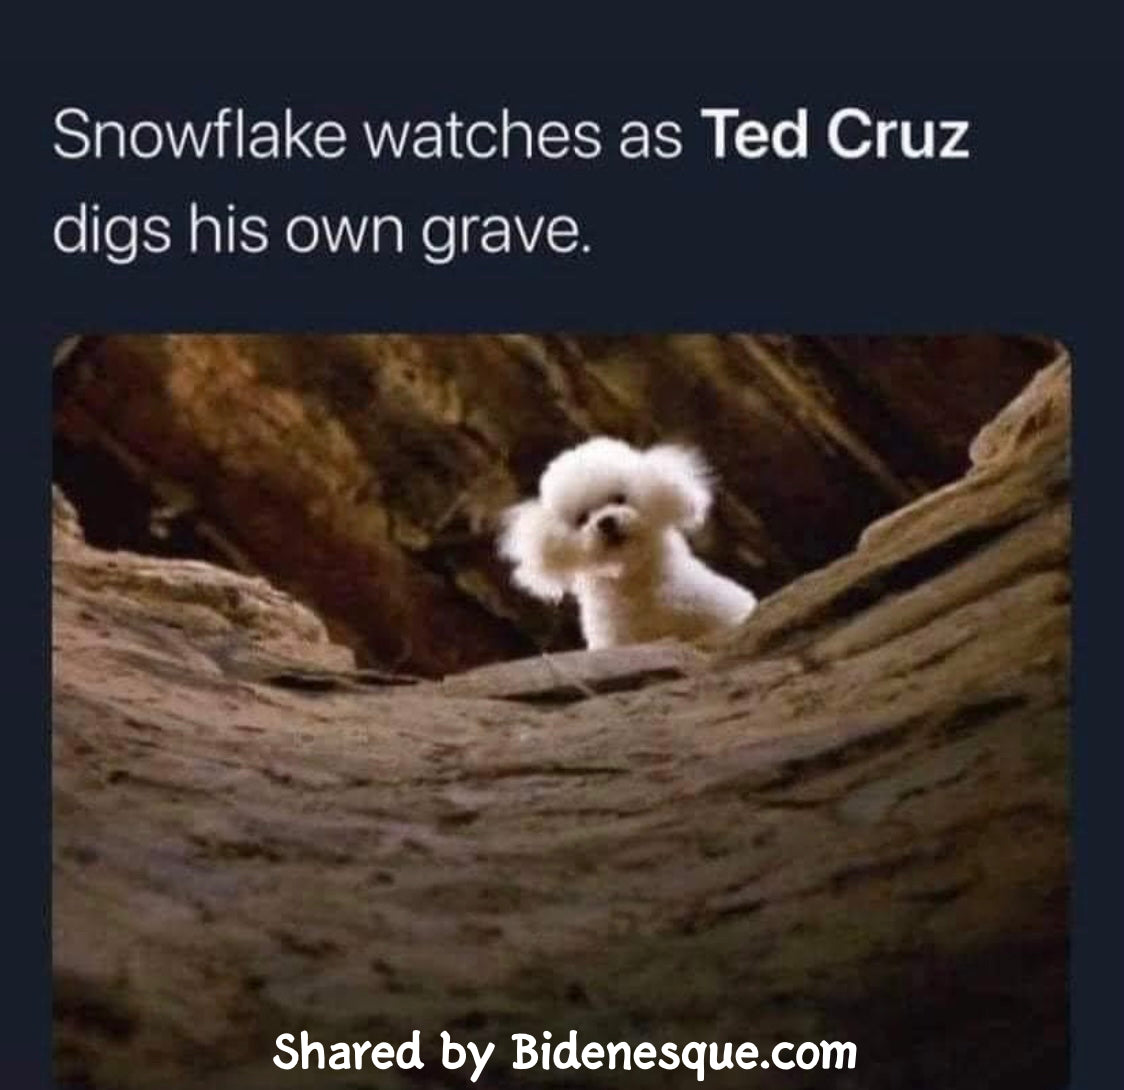 Snowflake watches as Ted Cruz digs his own grave